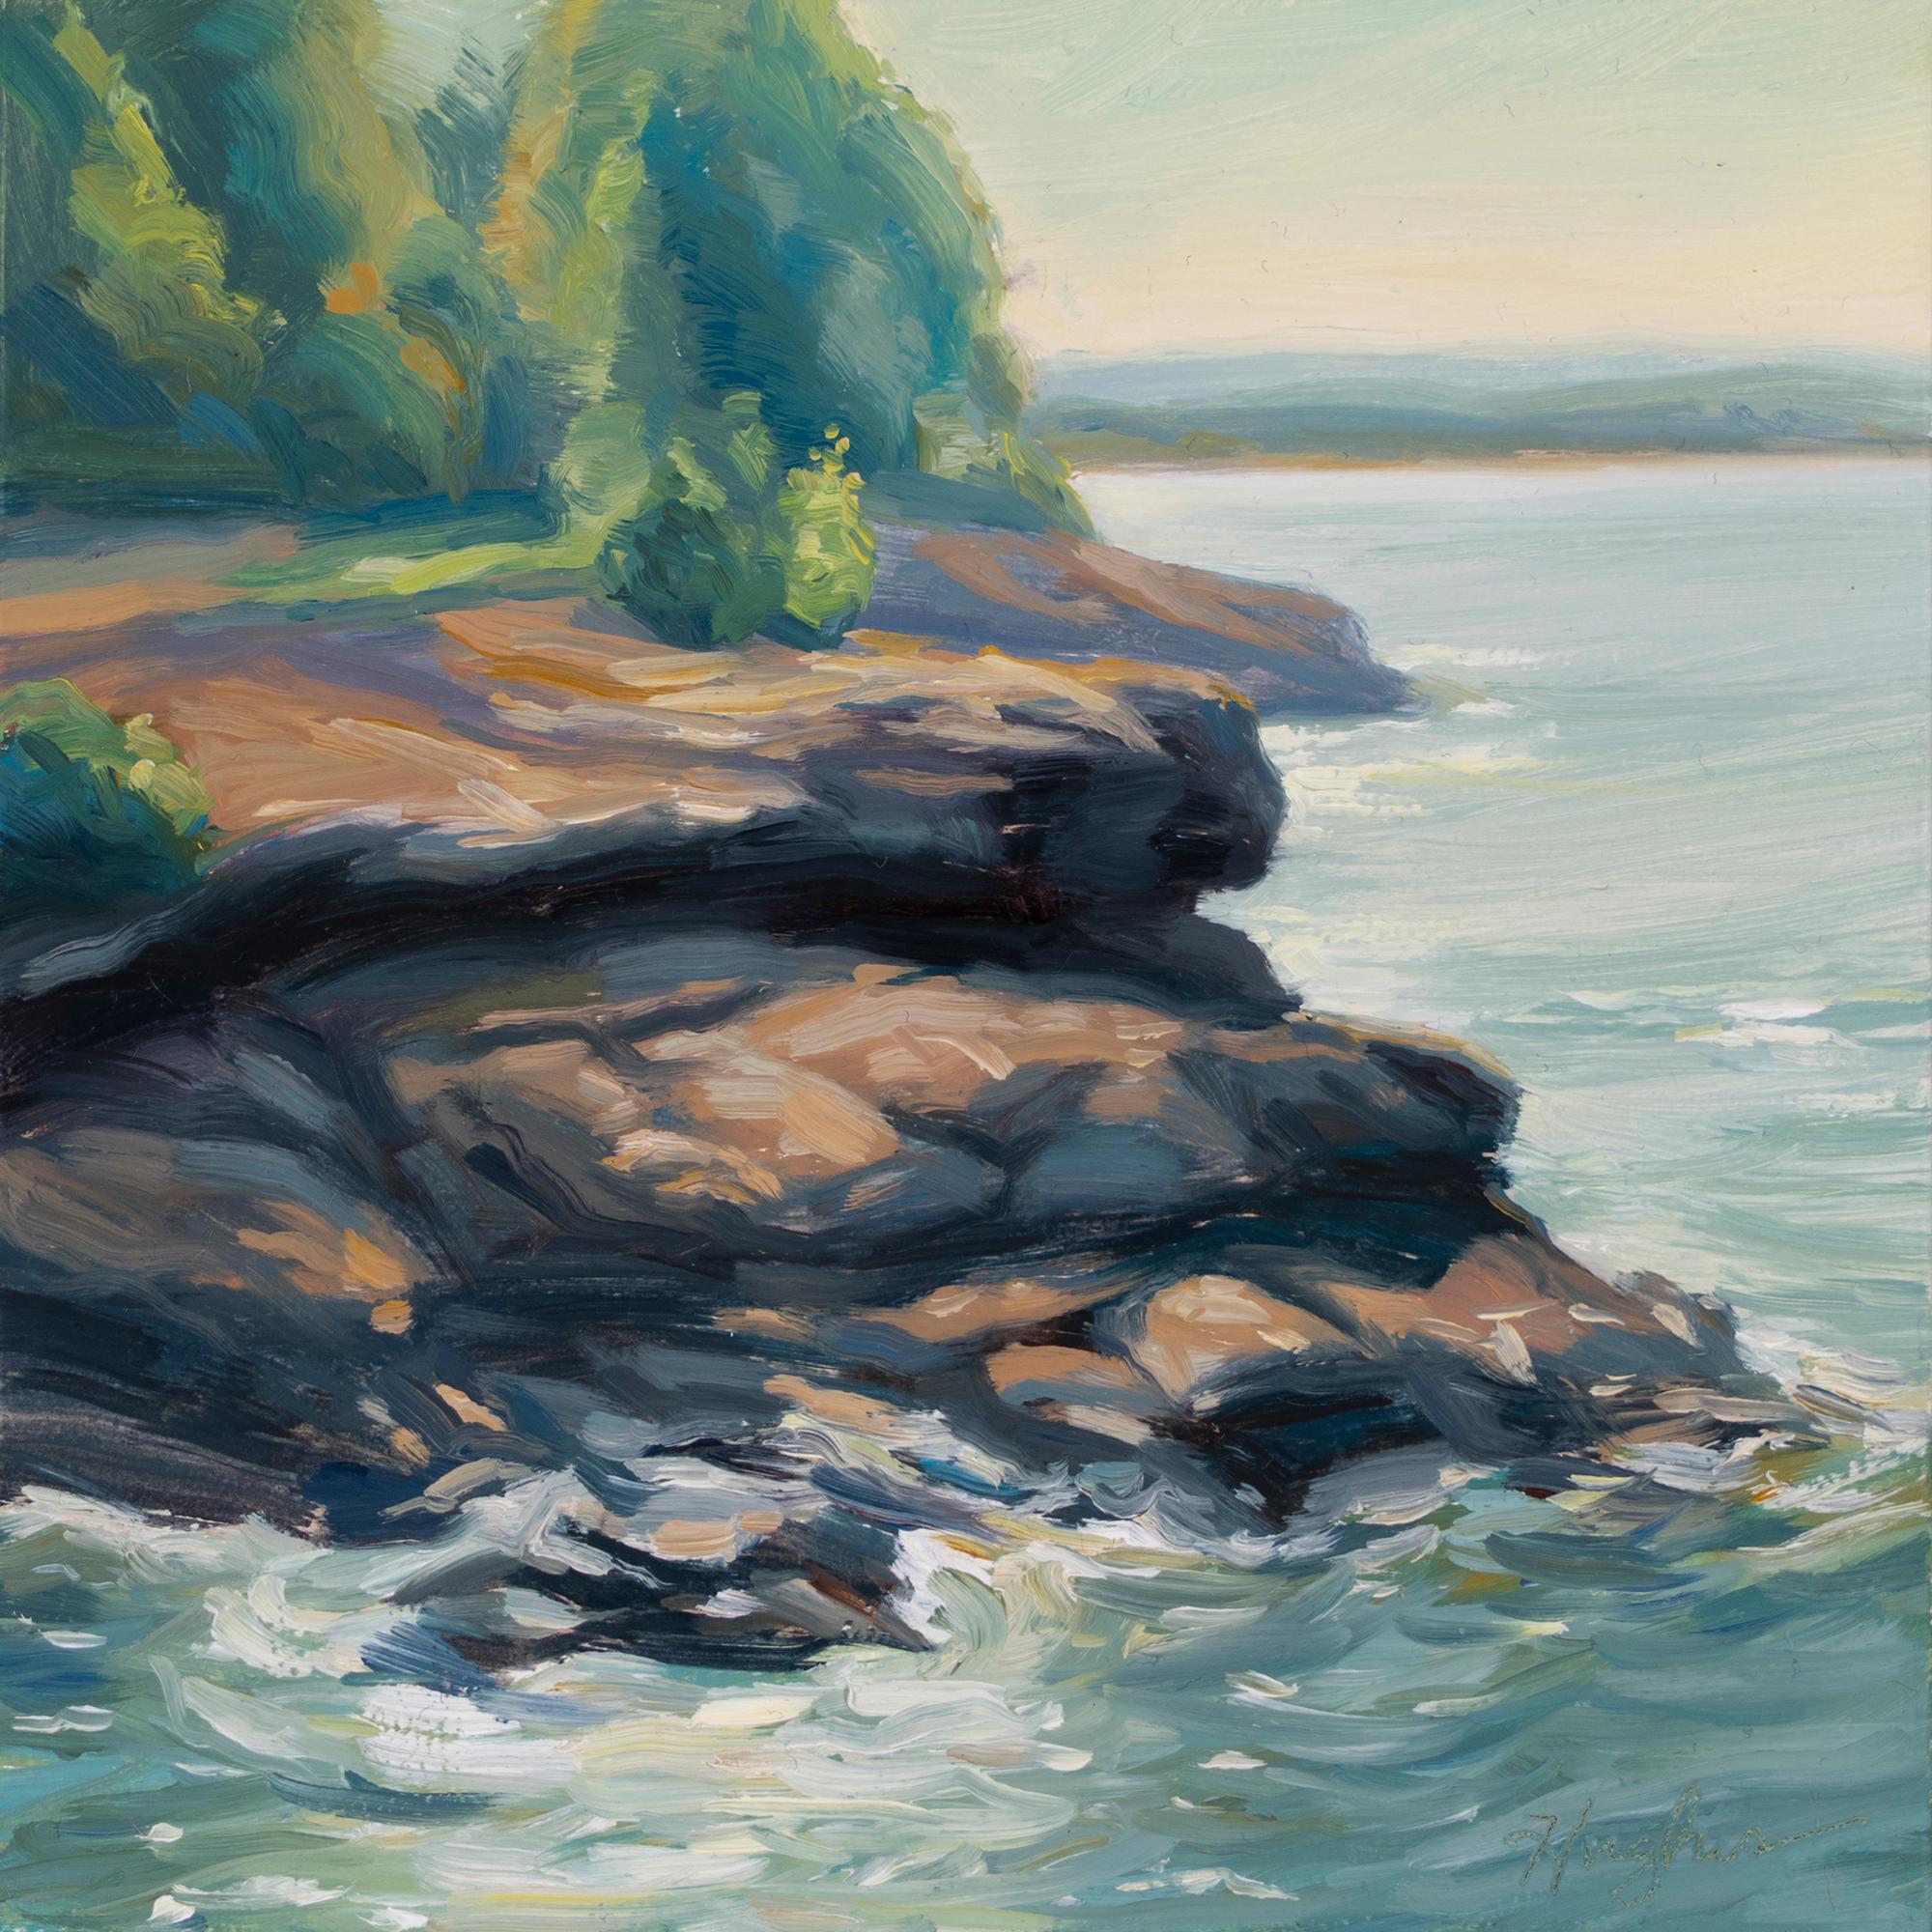 Primary Hughes Figurative Painting - "Presque Isle (Day 46), September 22, 2020" Oil Painting